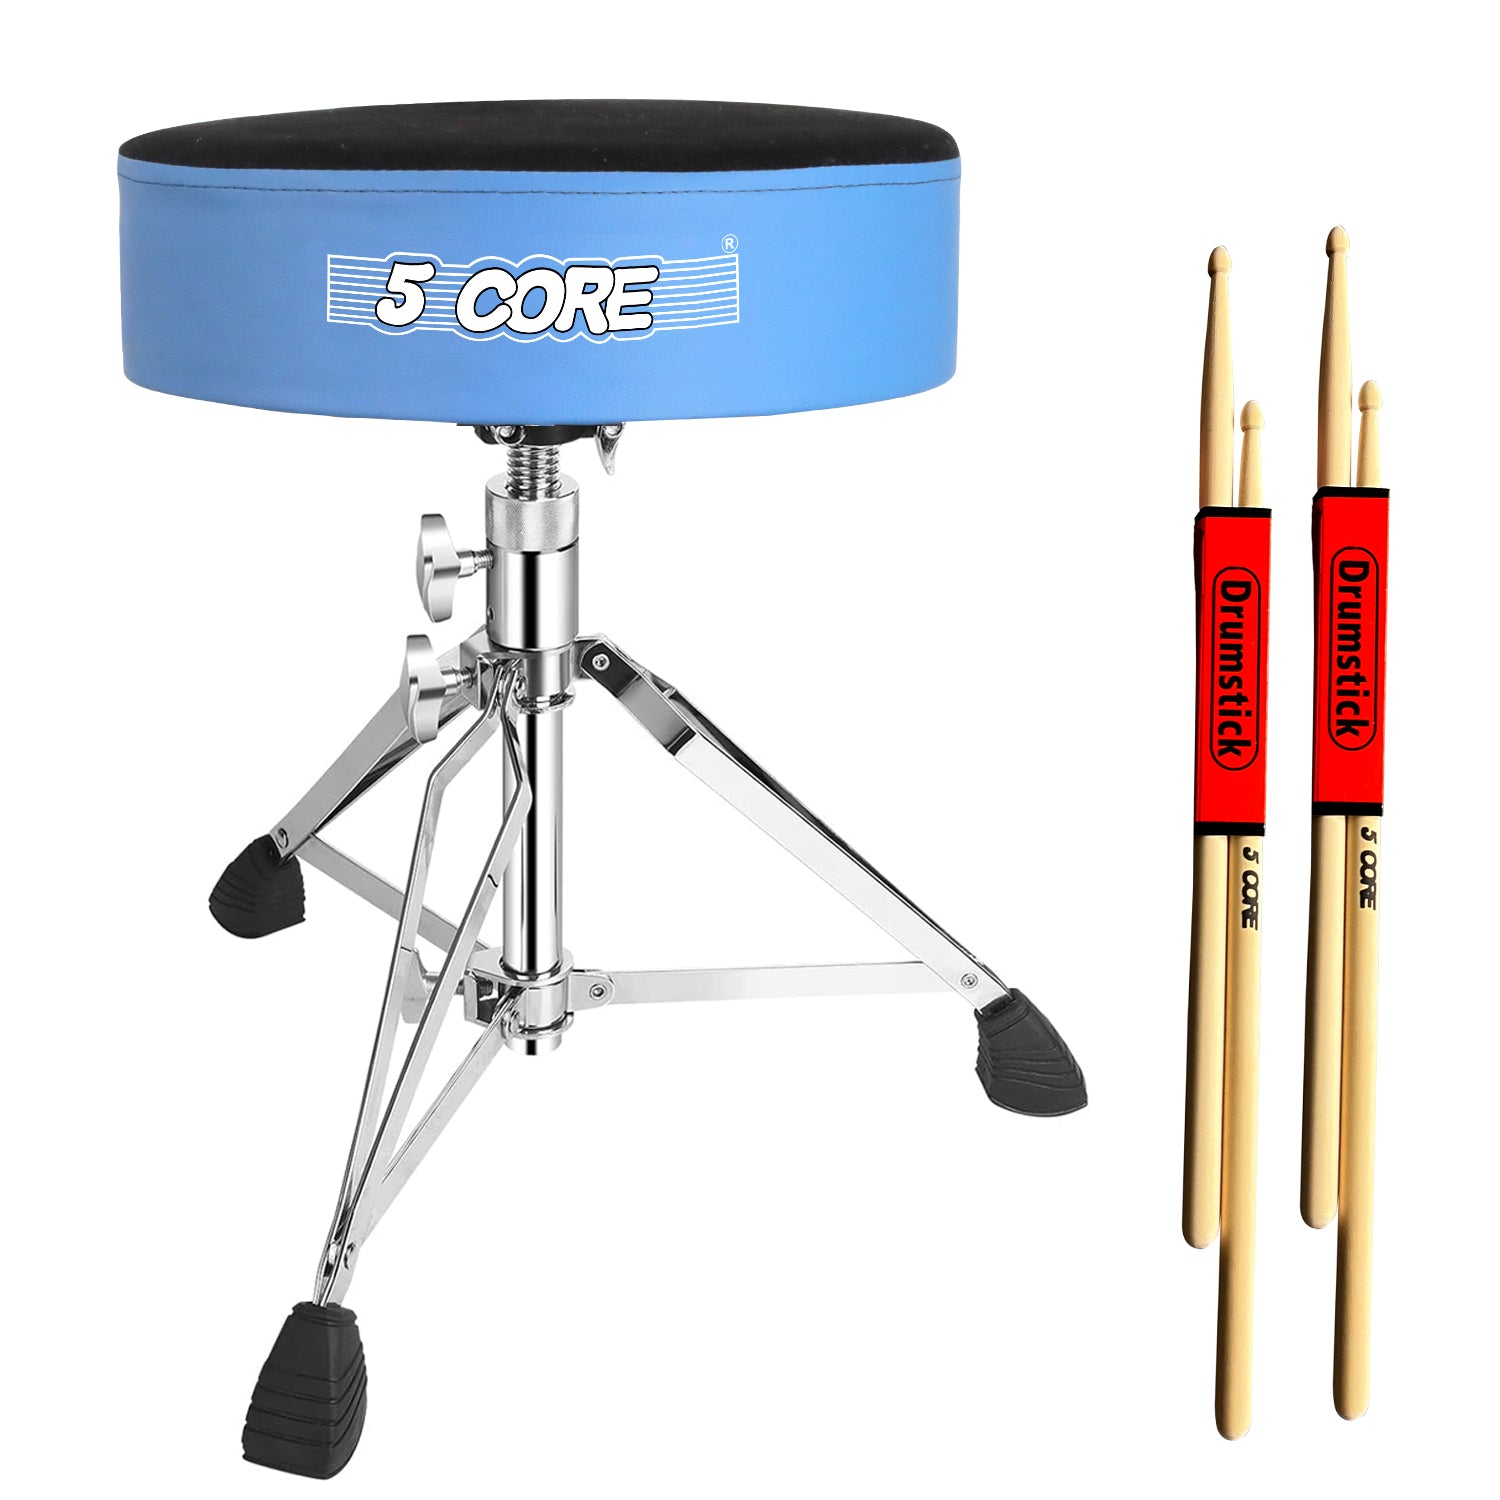 5 Core Drum Throne Comfortable Padded Guitar Stool Height Adjustable Music DJ Chair Heavy Duty Seat